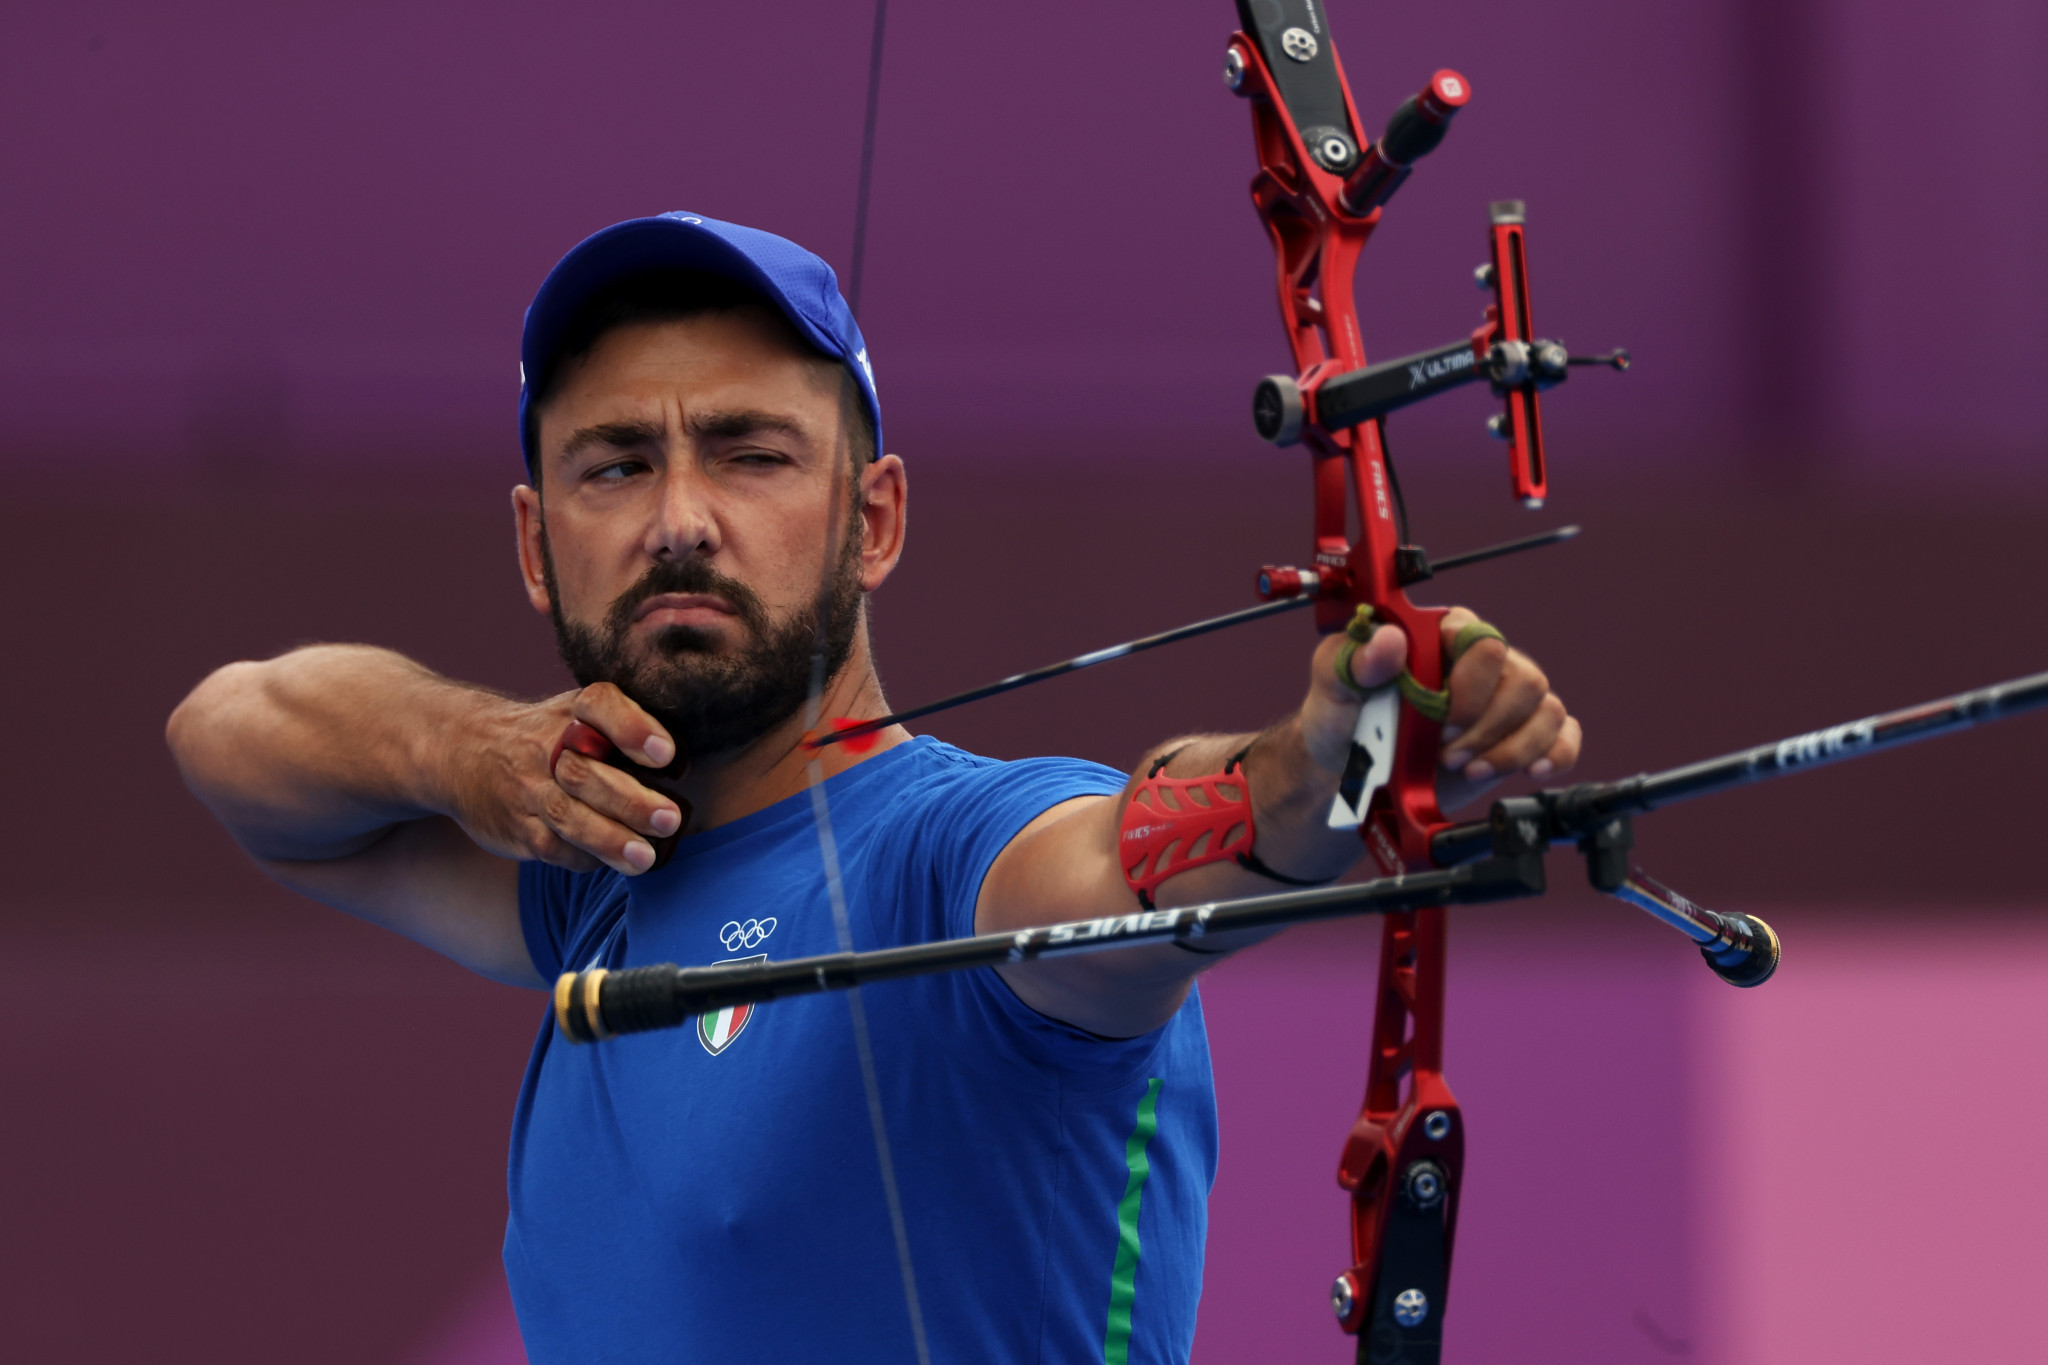 Shocks continue at European Indoor Archery Championships with Nespol exiting